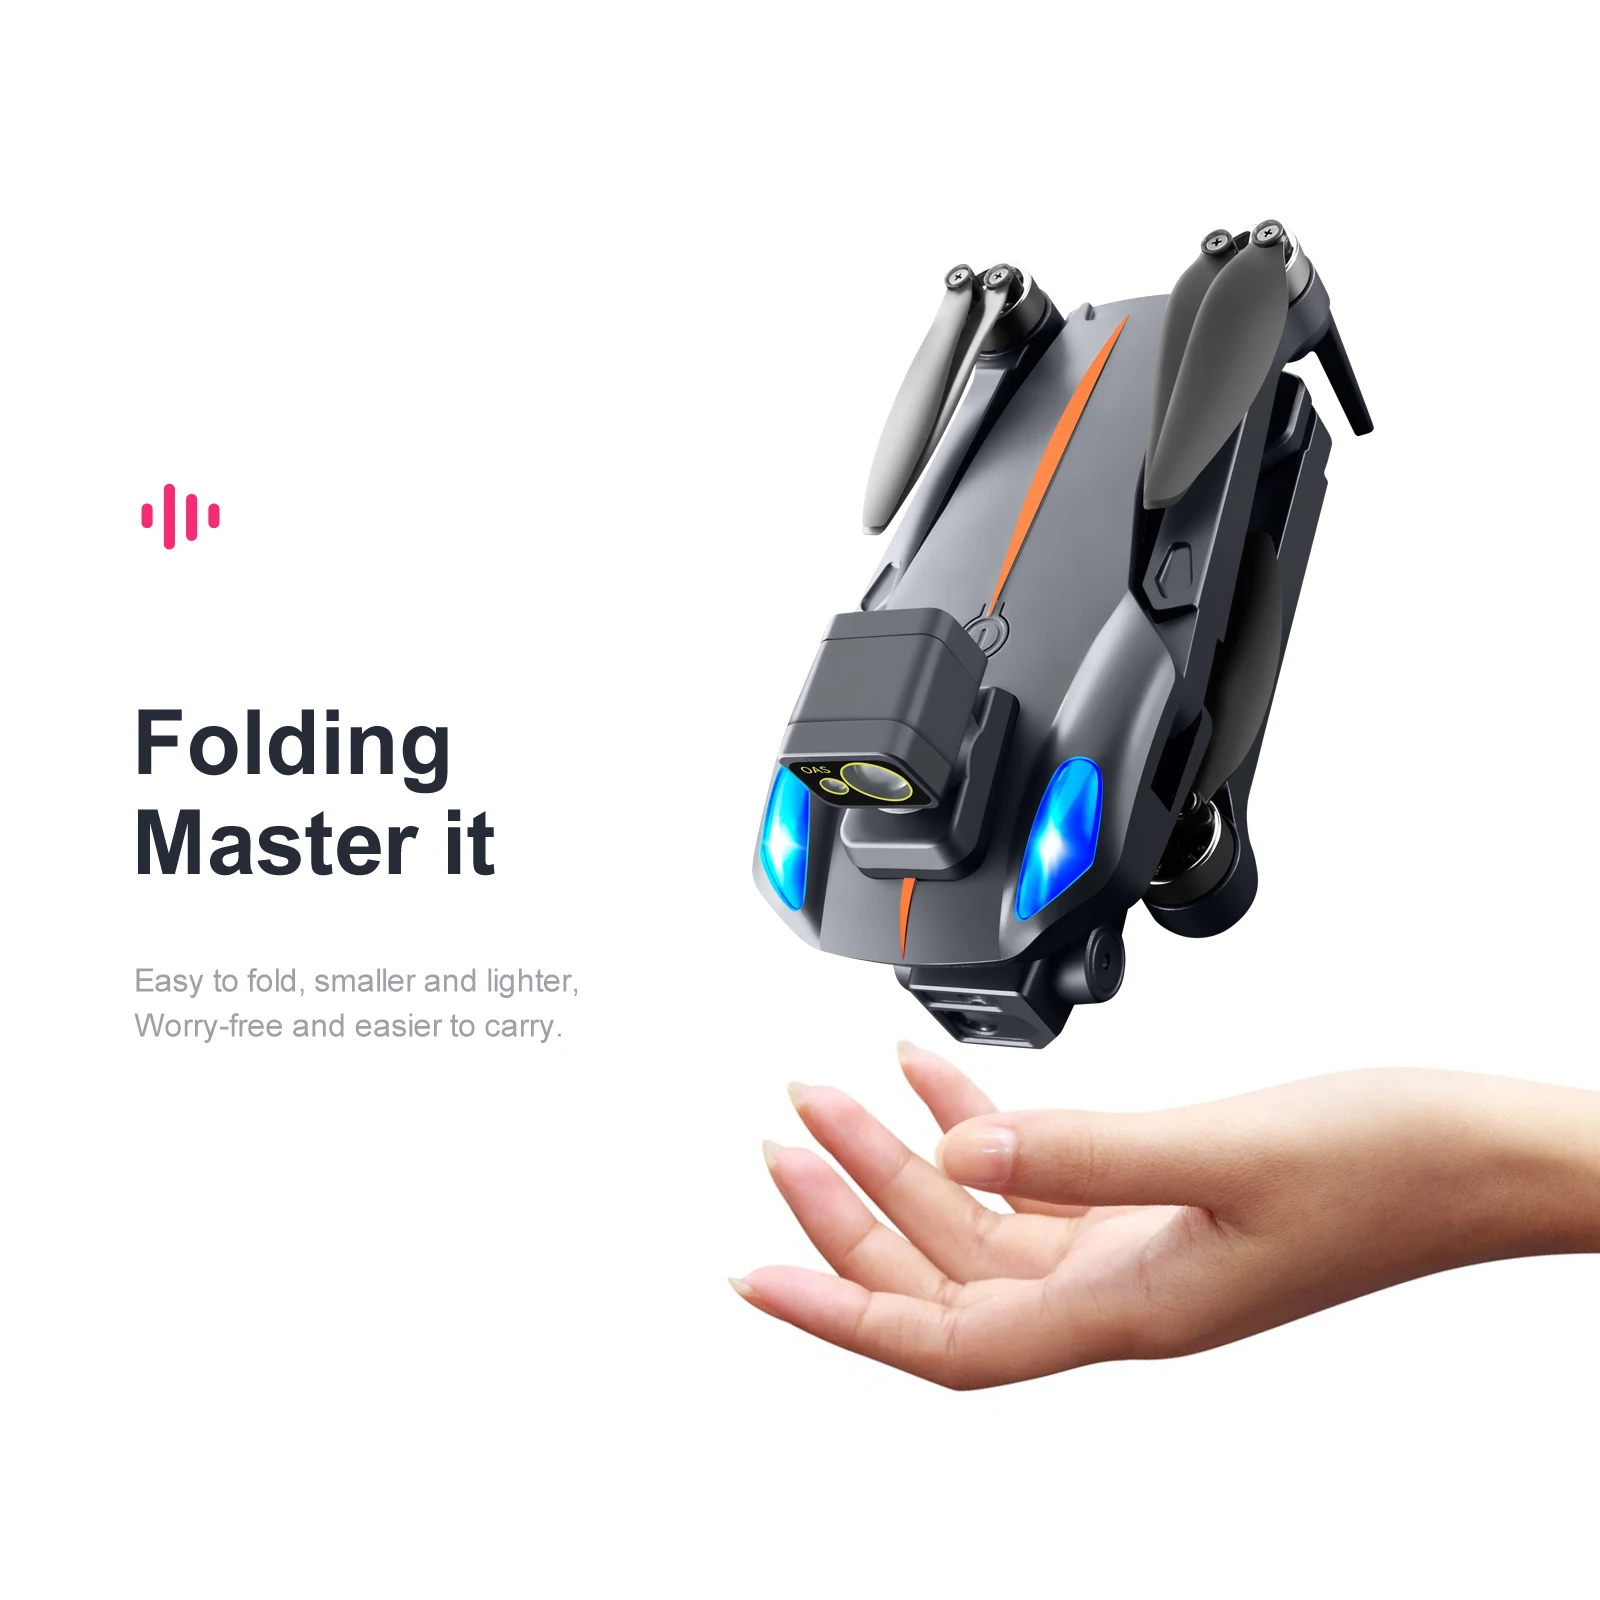 K911 MAX GPS Drone, Folding O Master it Easy to fold, smaller and lighter; Worry-free and easier